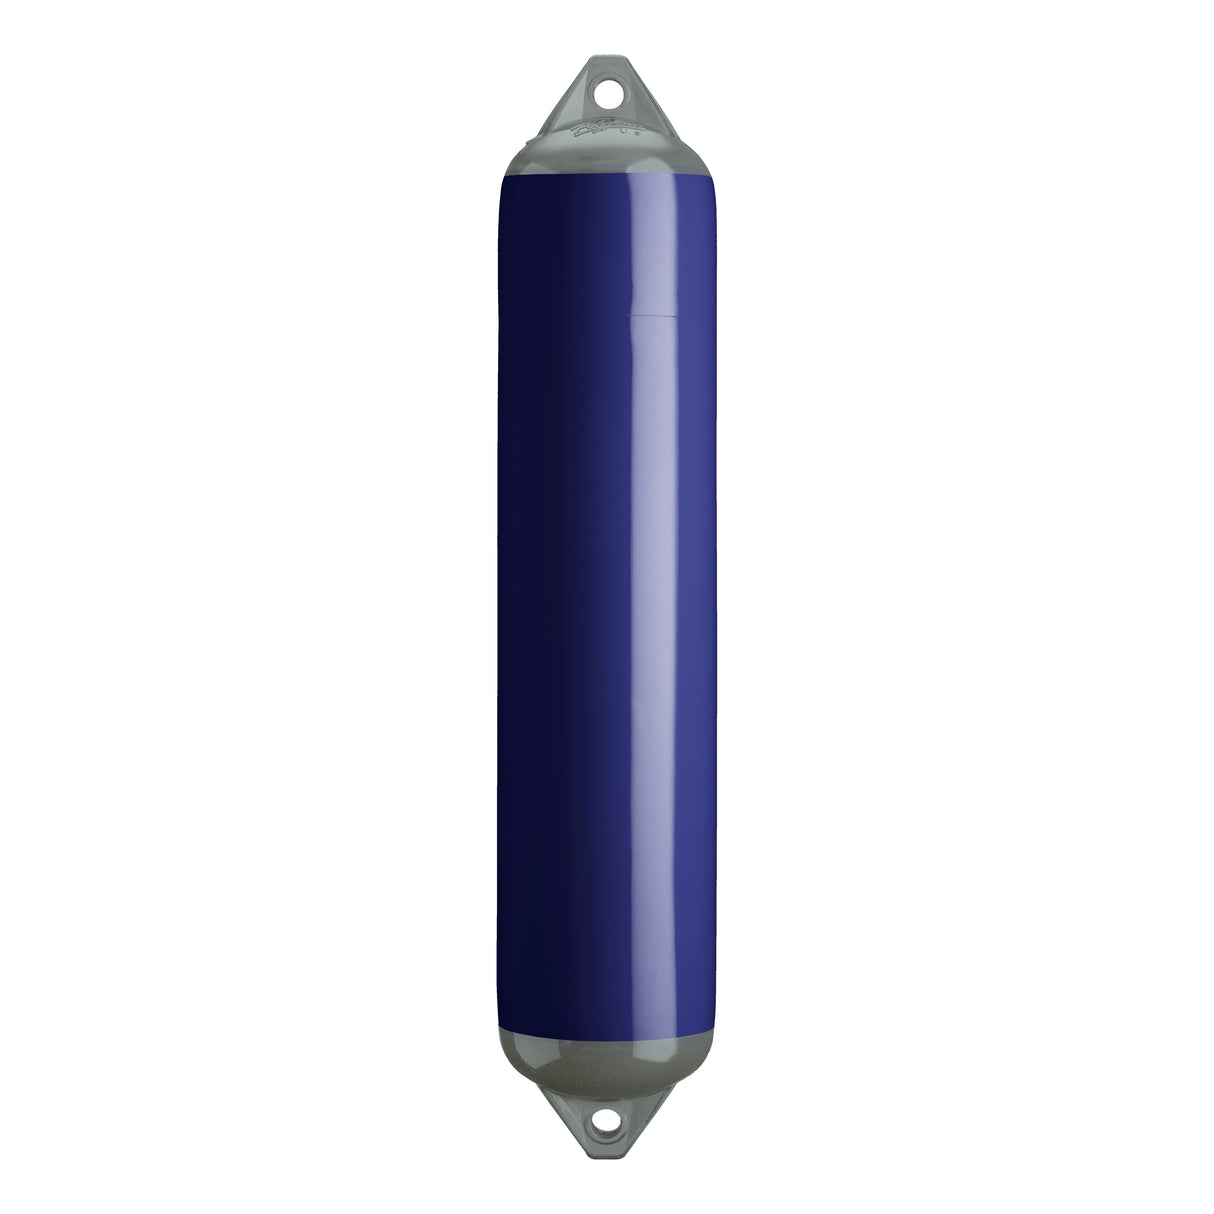 Navy Blue boat fender with Grey-Top, Polyform F-4